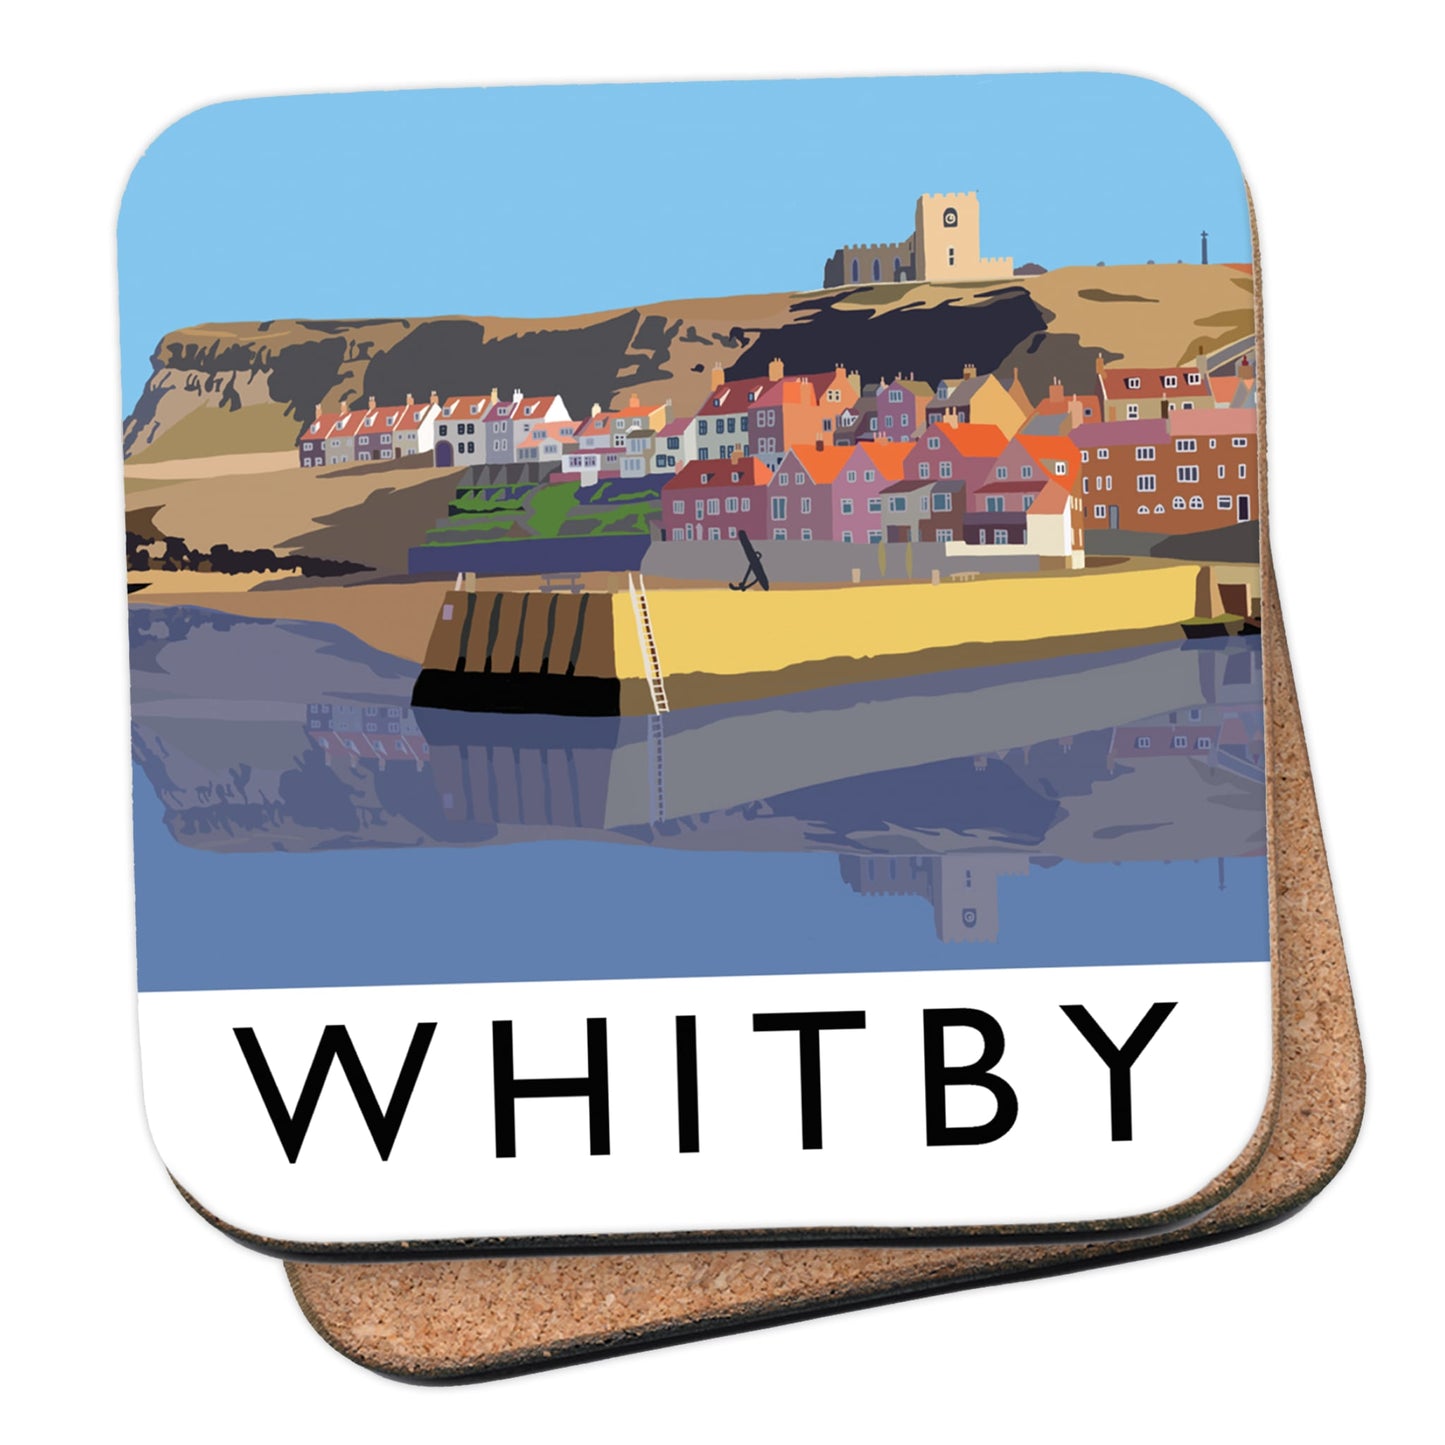 Whitby Coaster - The Great Yorkshire Shop